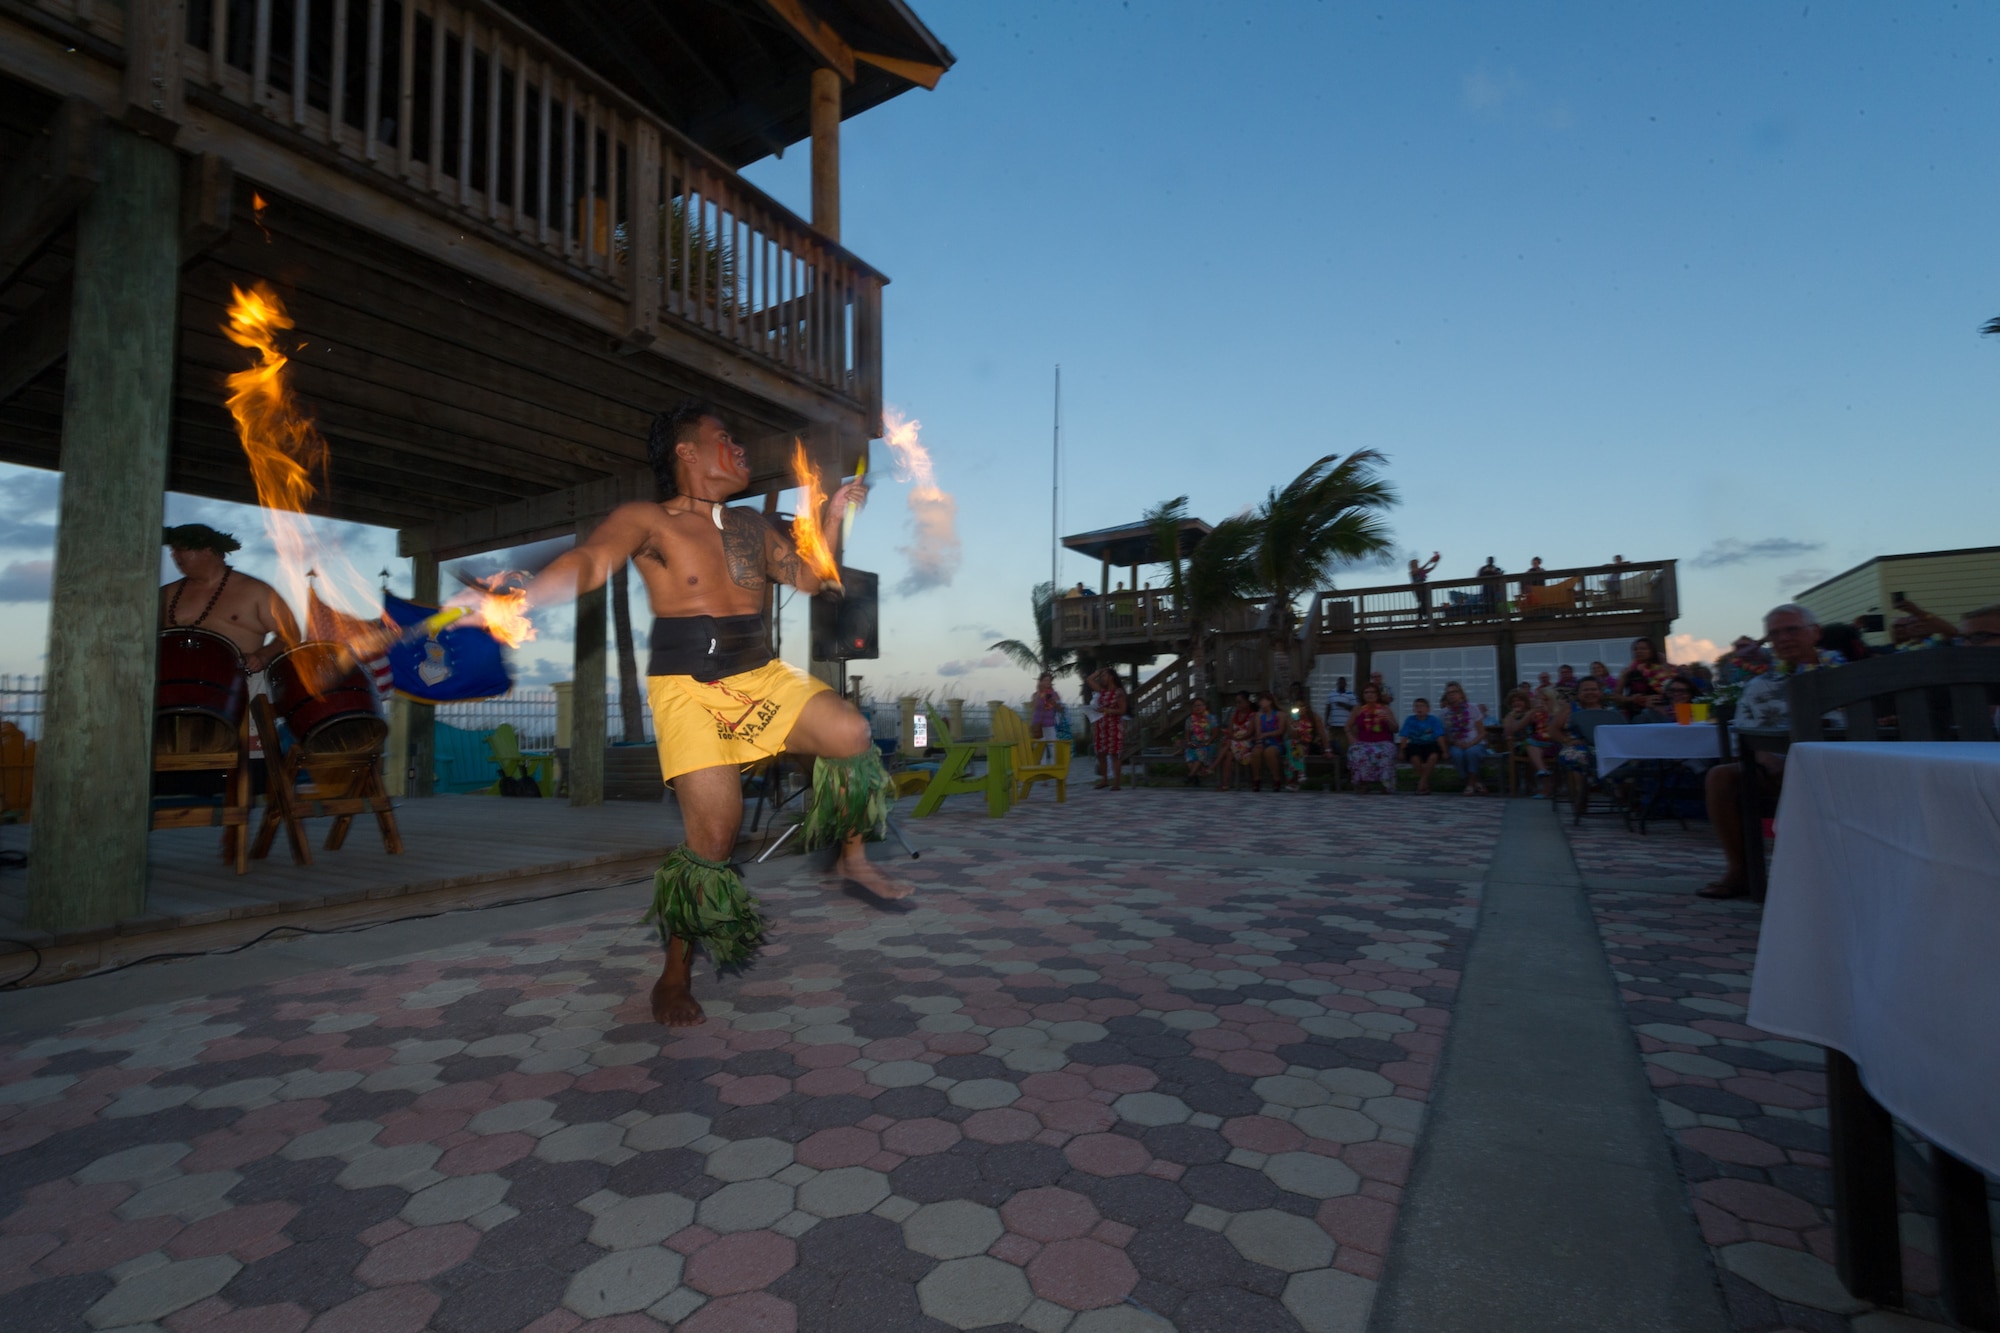 Via “VJ” Tiumalu, Jr., current Senior Division World Fireknife dancing champion, performs for the 45th Space Wing Luau event at the Beach House May 29, 2015, at Patrick Air Force Base, Fla. The art of fireknife dancing includes spinning, catching and even balancing flaming, sharpened knives on callused feet. (U.S. Air Force photo/Cory Long) (Released)